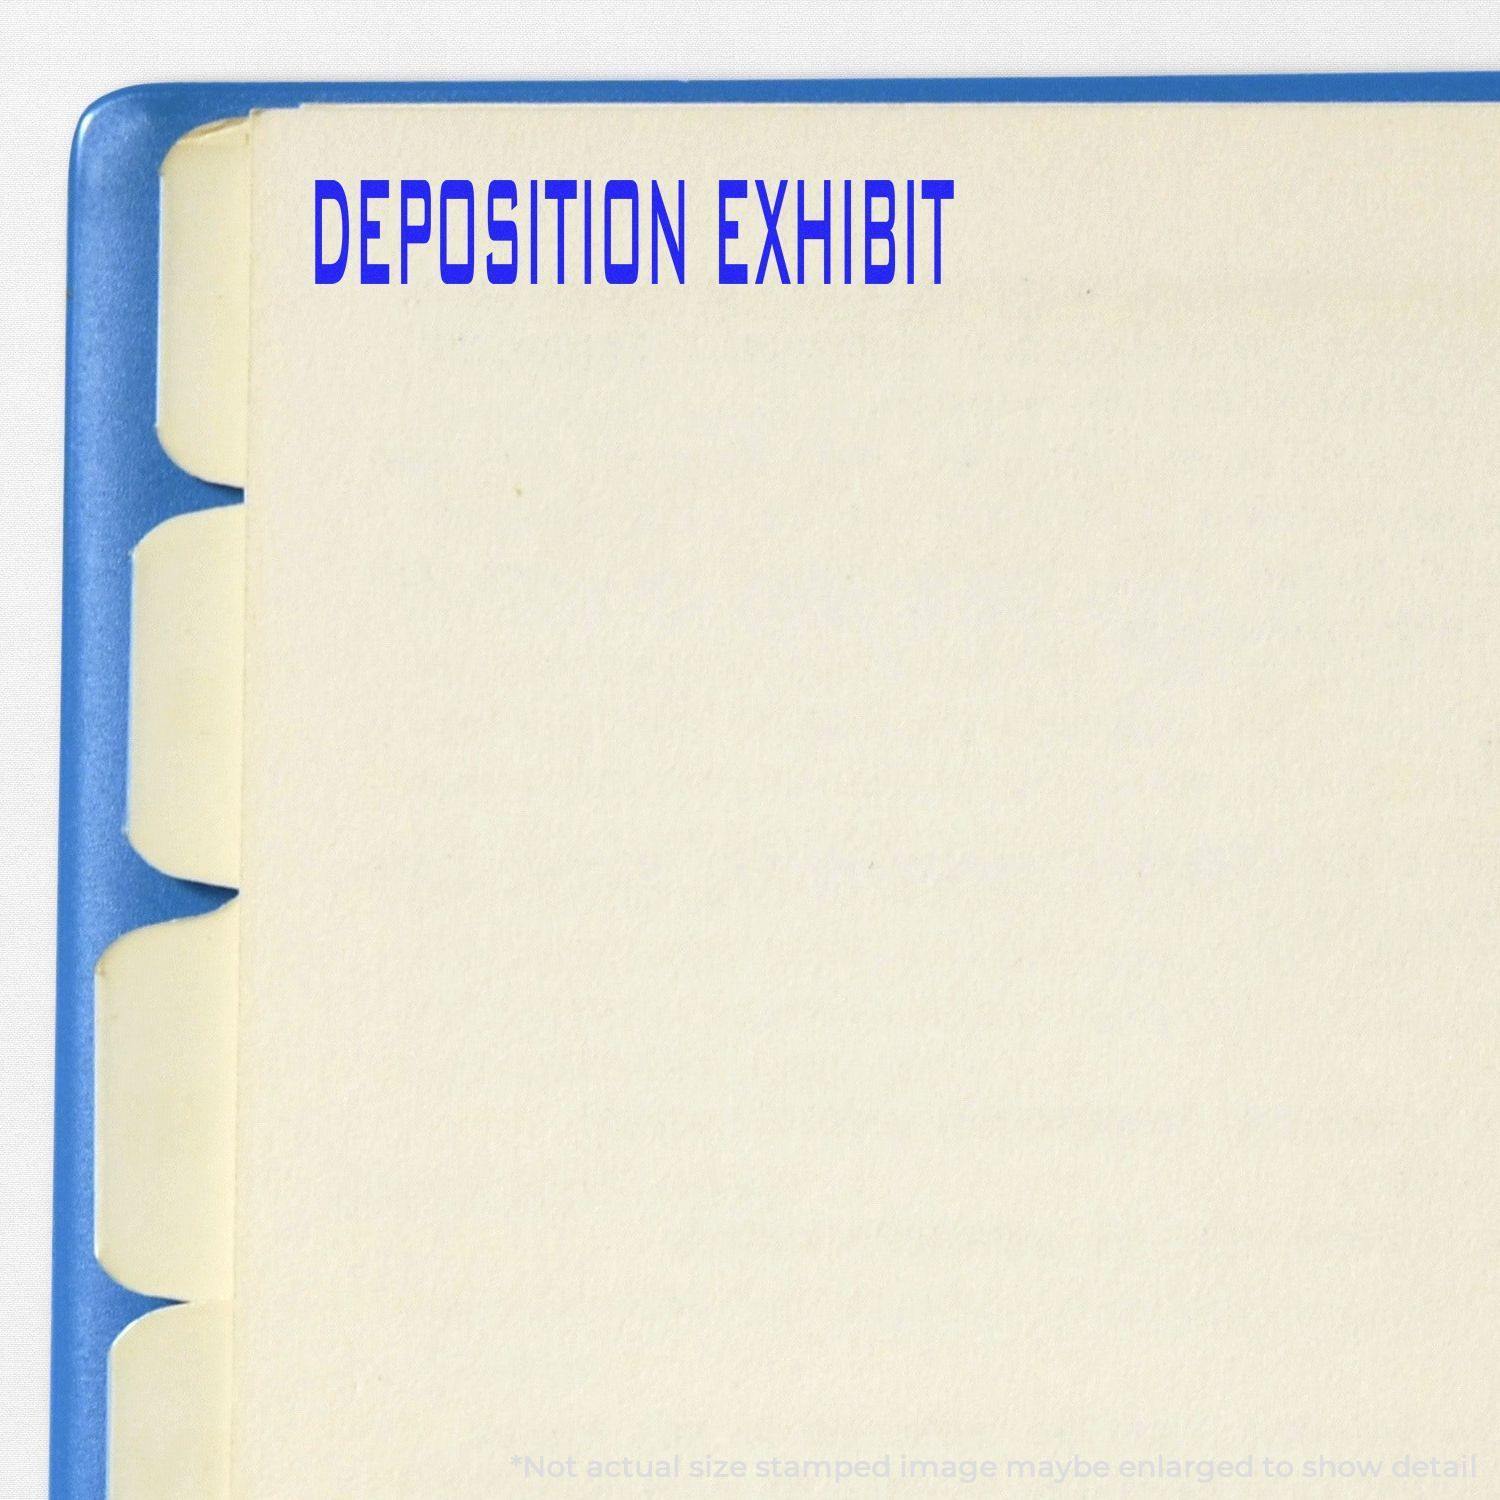 A self-inking stamp with a stamped image showing how the text "DEPOSITION EXHIBIT" is displayed after stamping.